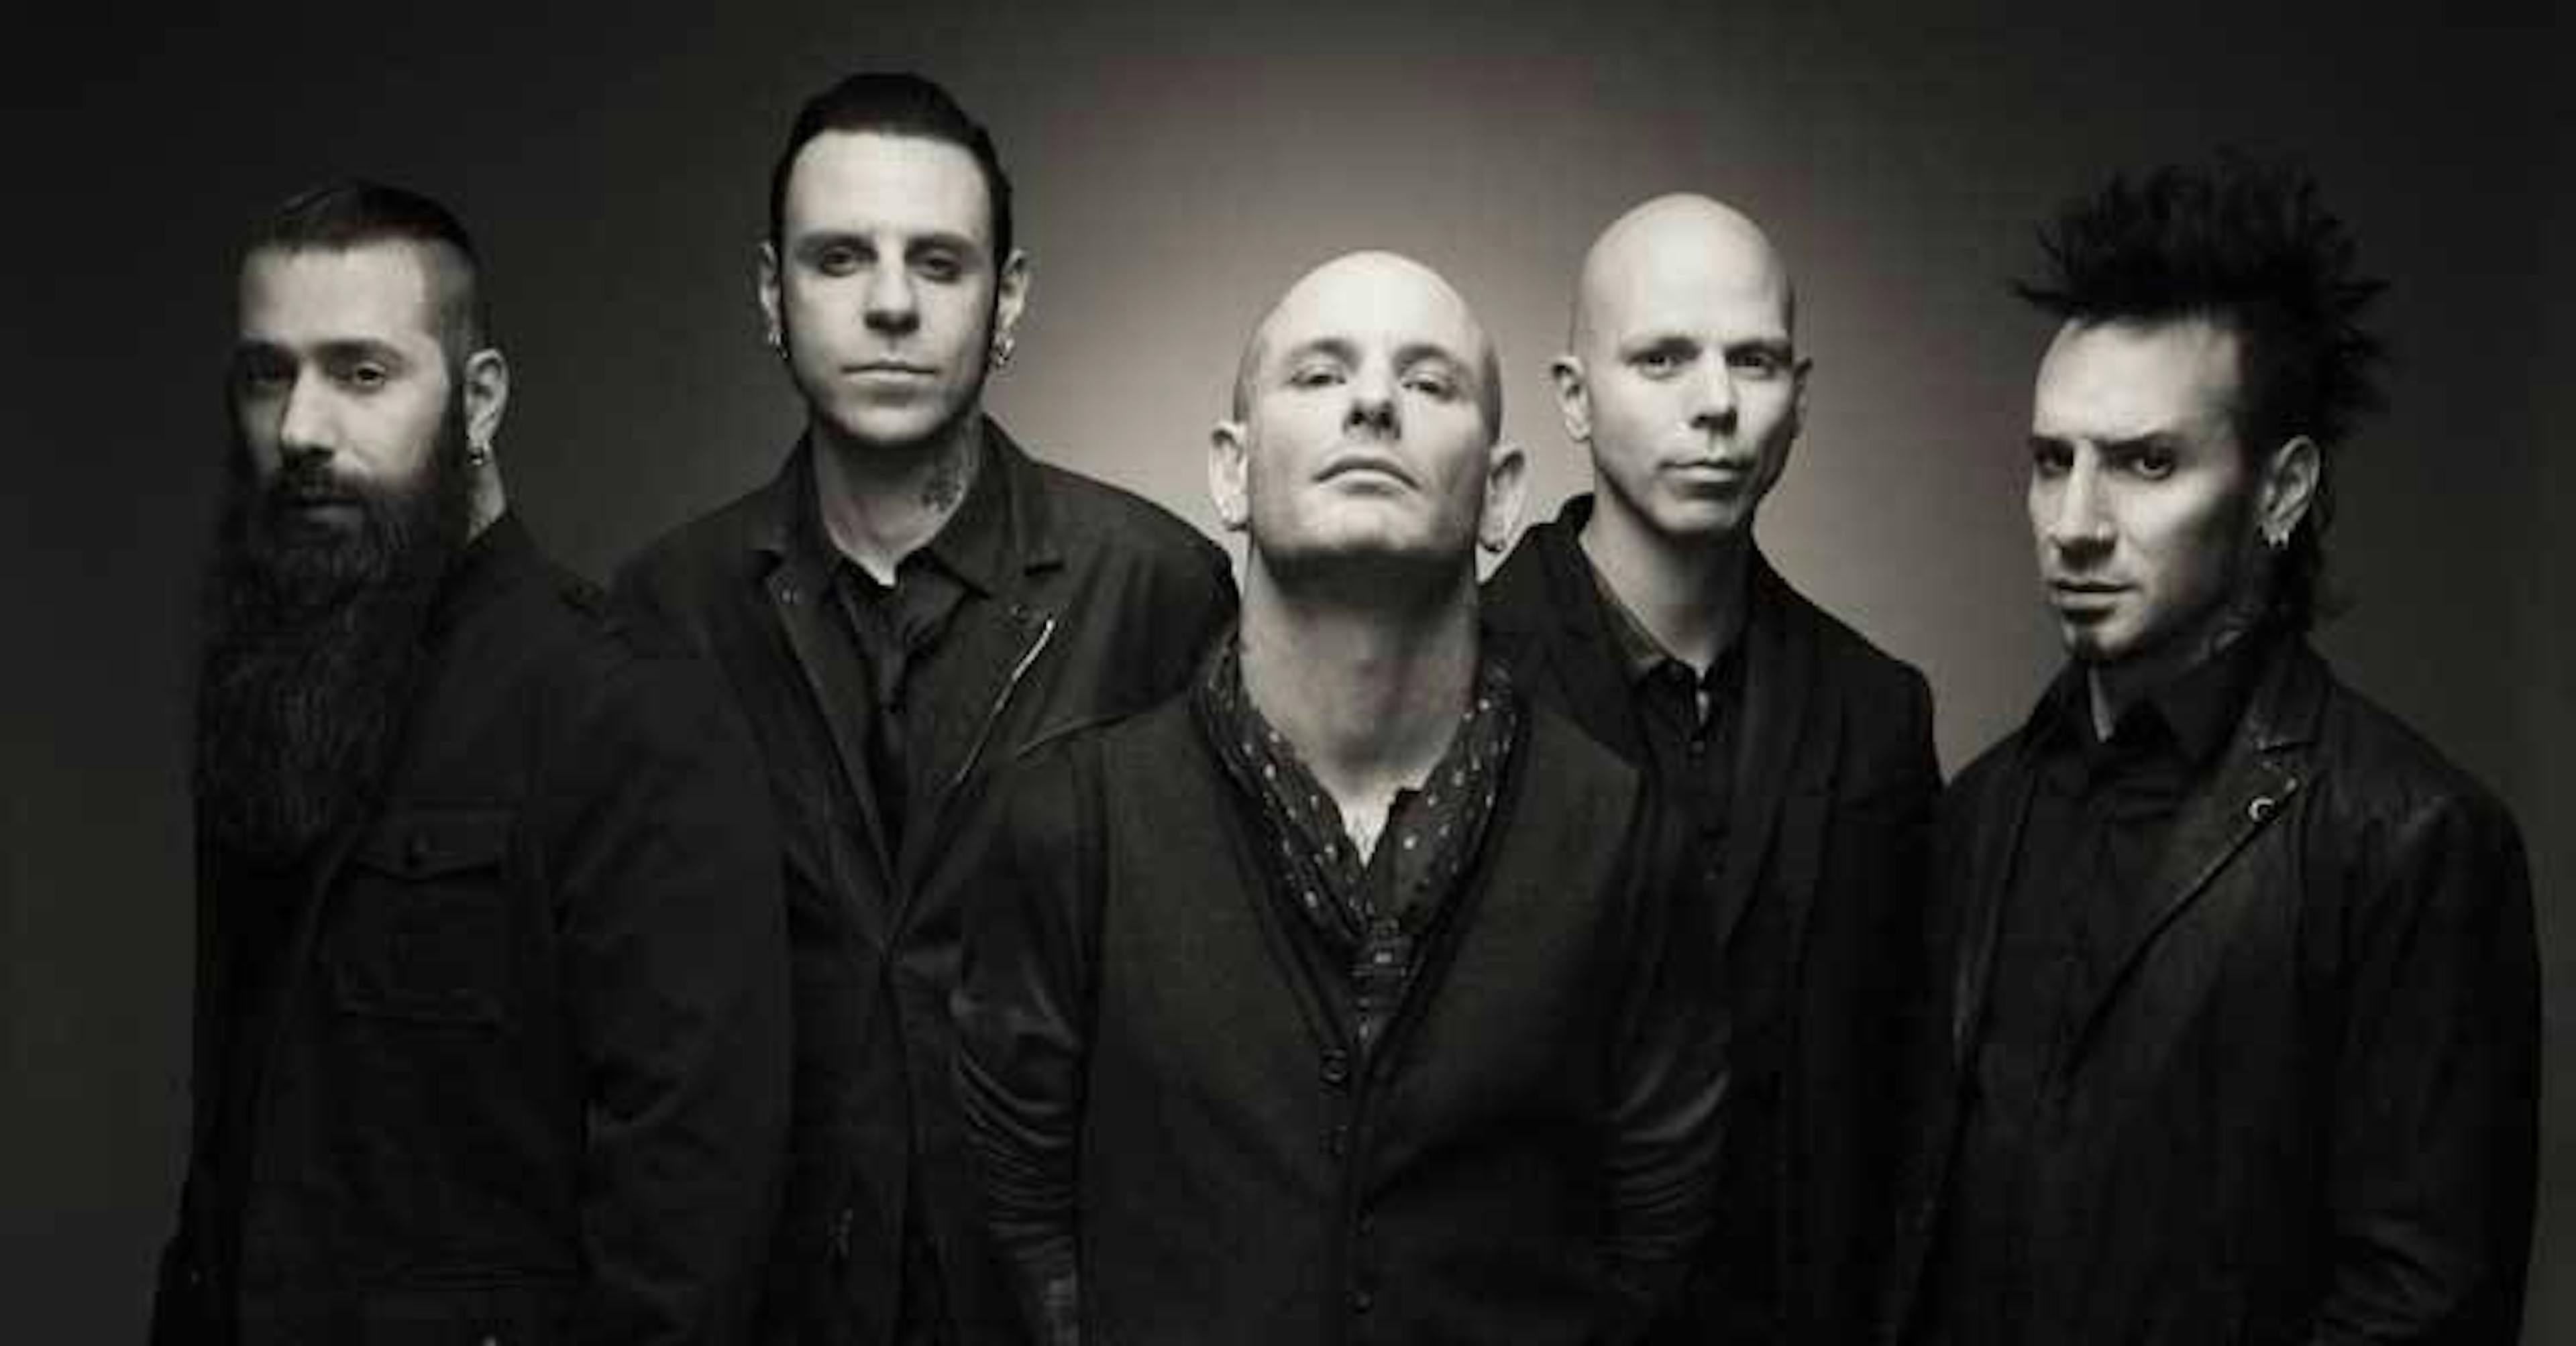 Listen To Stone Sour And Lzzy Hale Cover The Rolling Stones